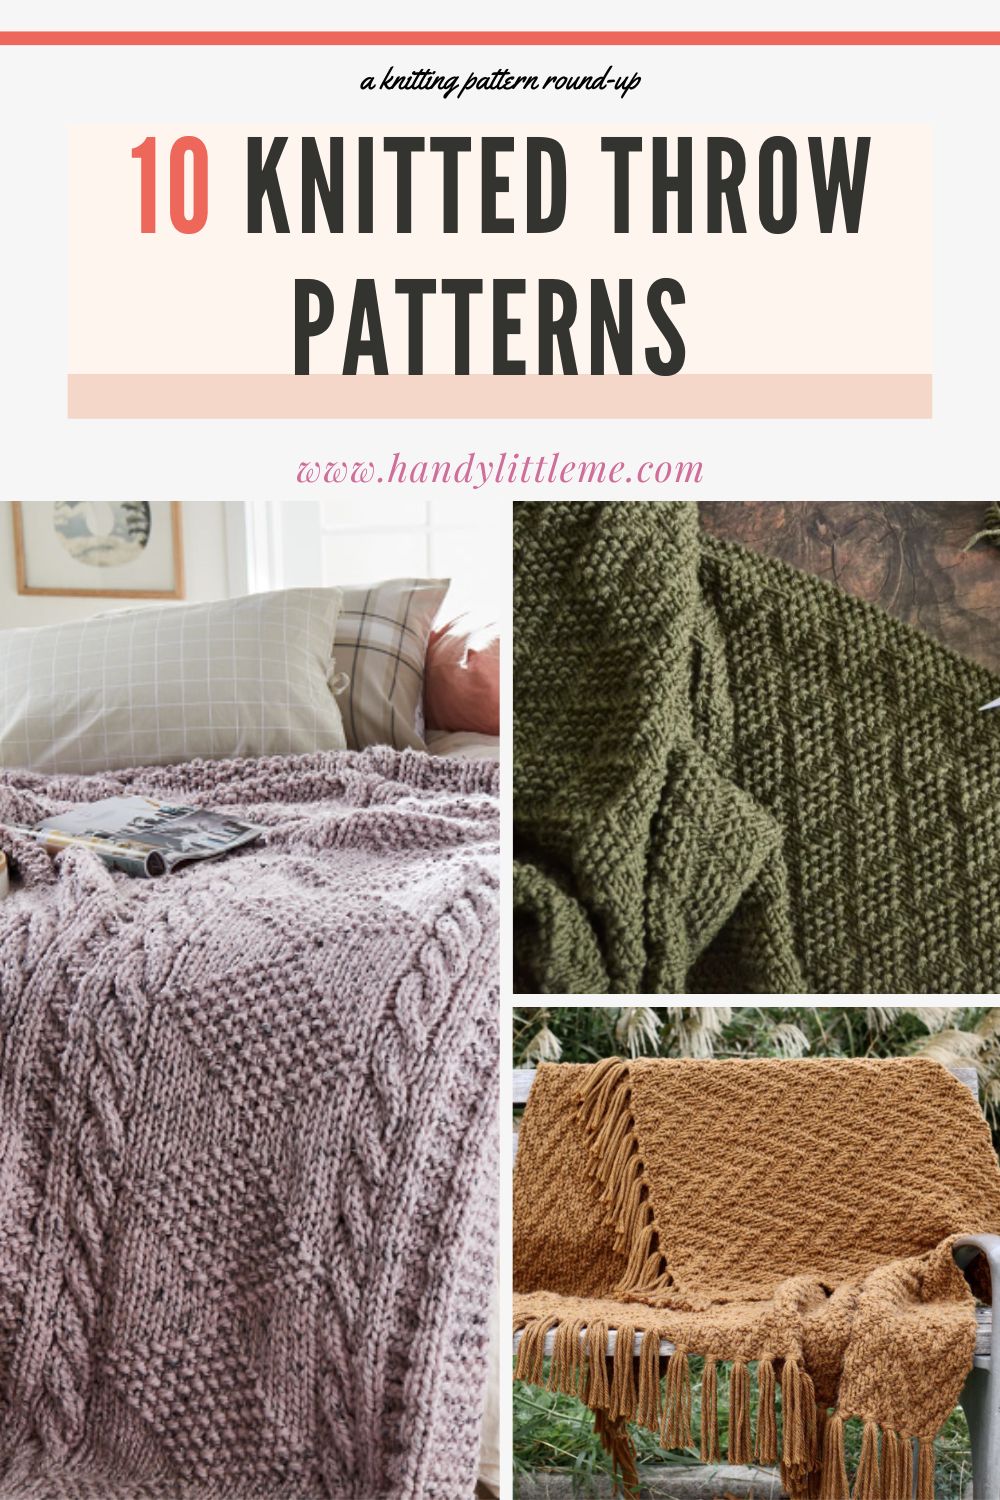 10 Knitted Throw Patterns - Handy Little Me